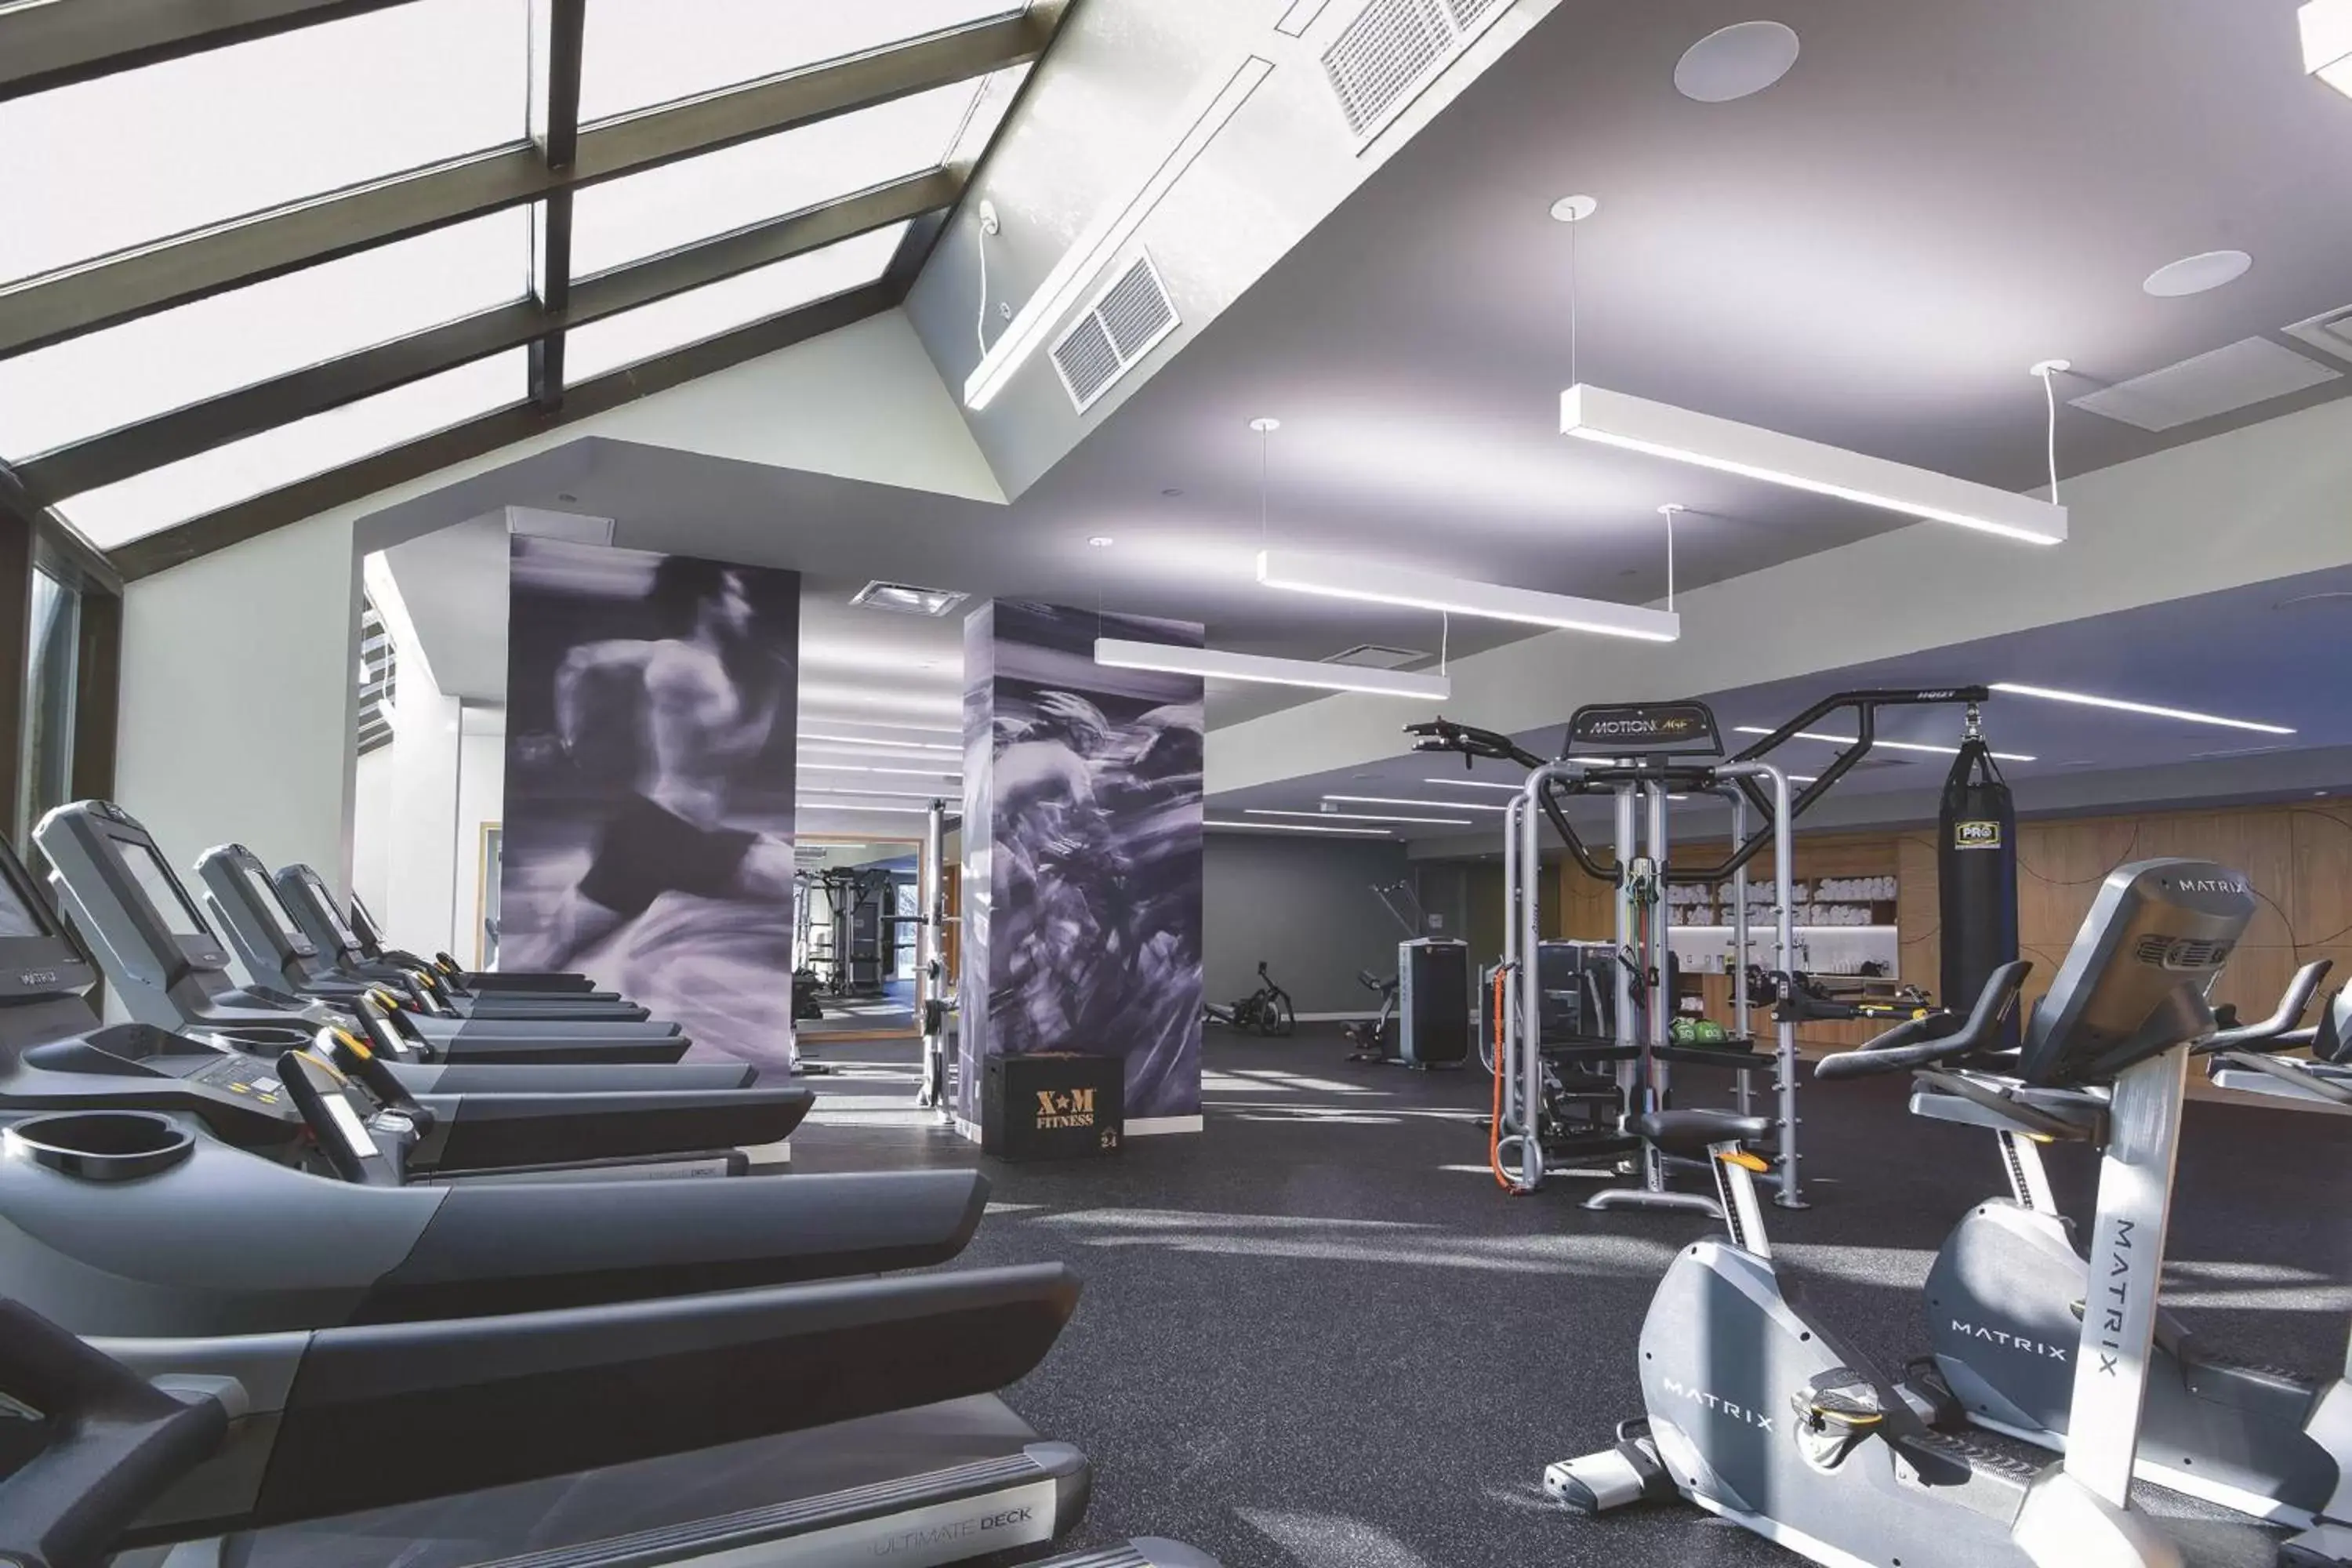 Fitness centre/facilities, Fitness Center/Facilities in Montreal Marriott Chateau Champlain